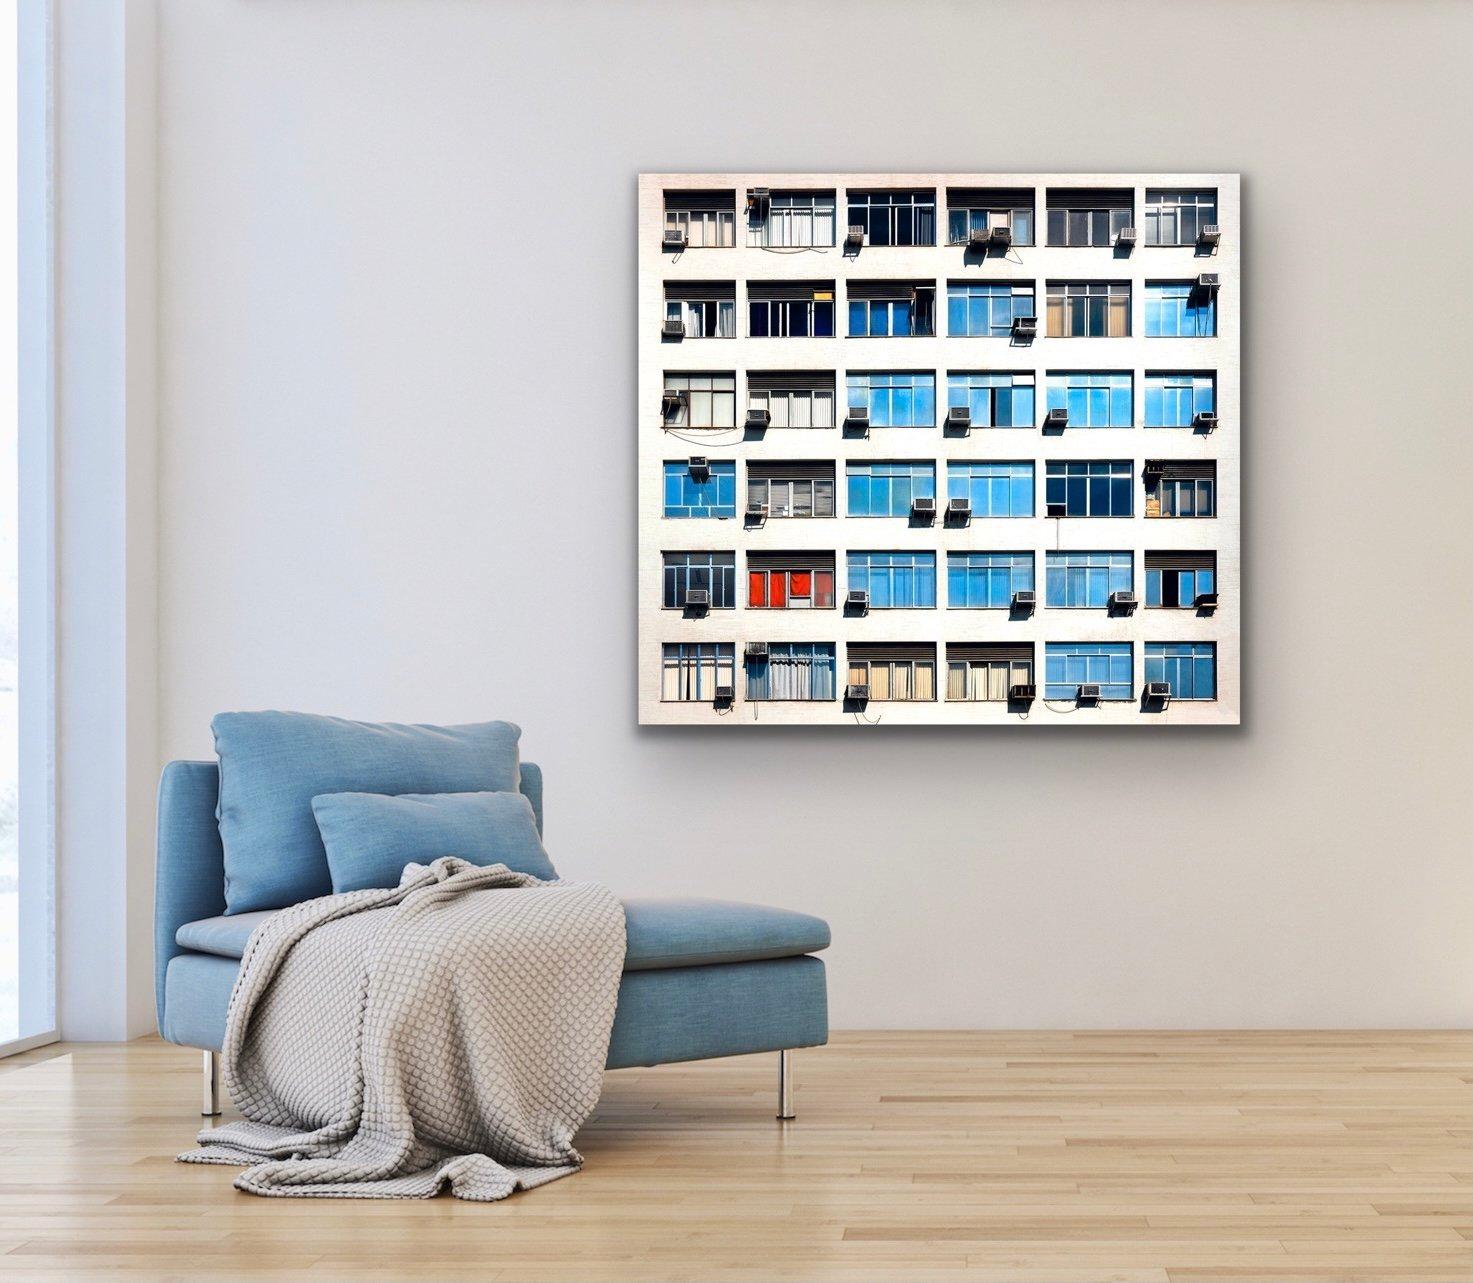 18 Flats by Barry Cawston 120 x 110cm C-type Photographic Print Only For Sale 1